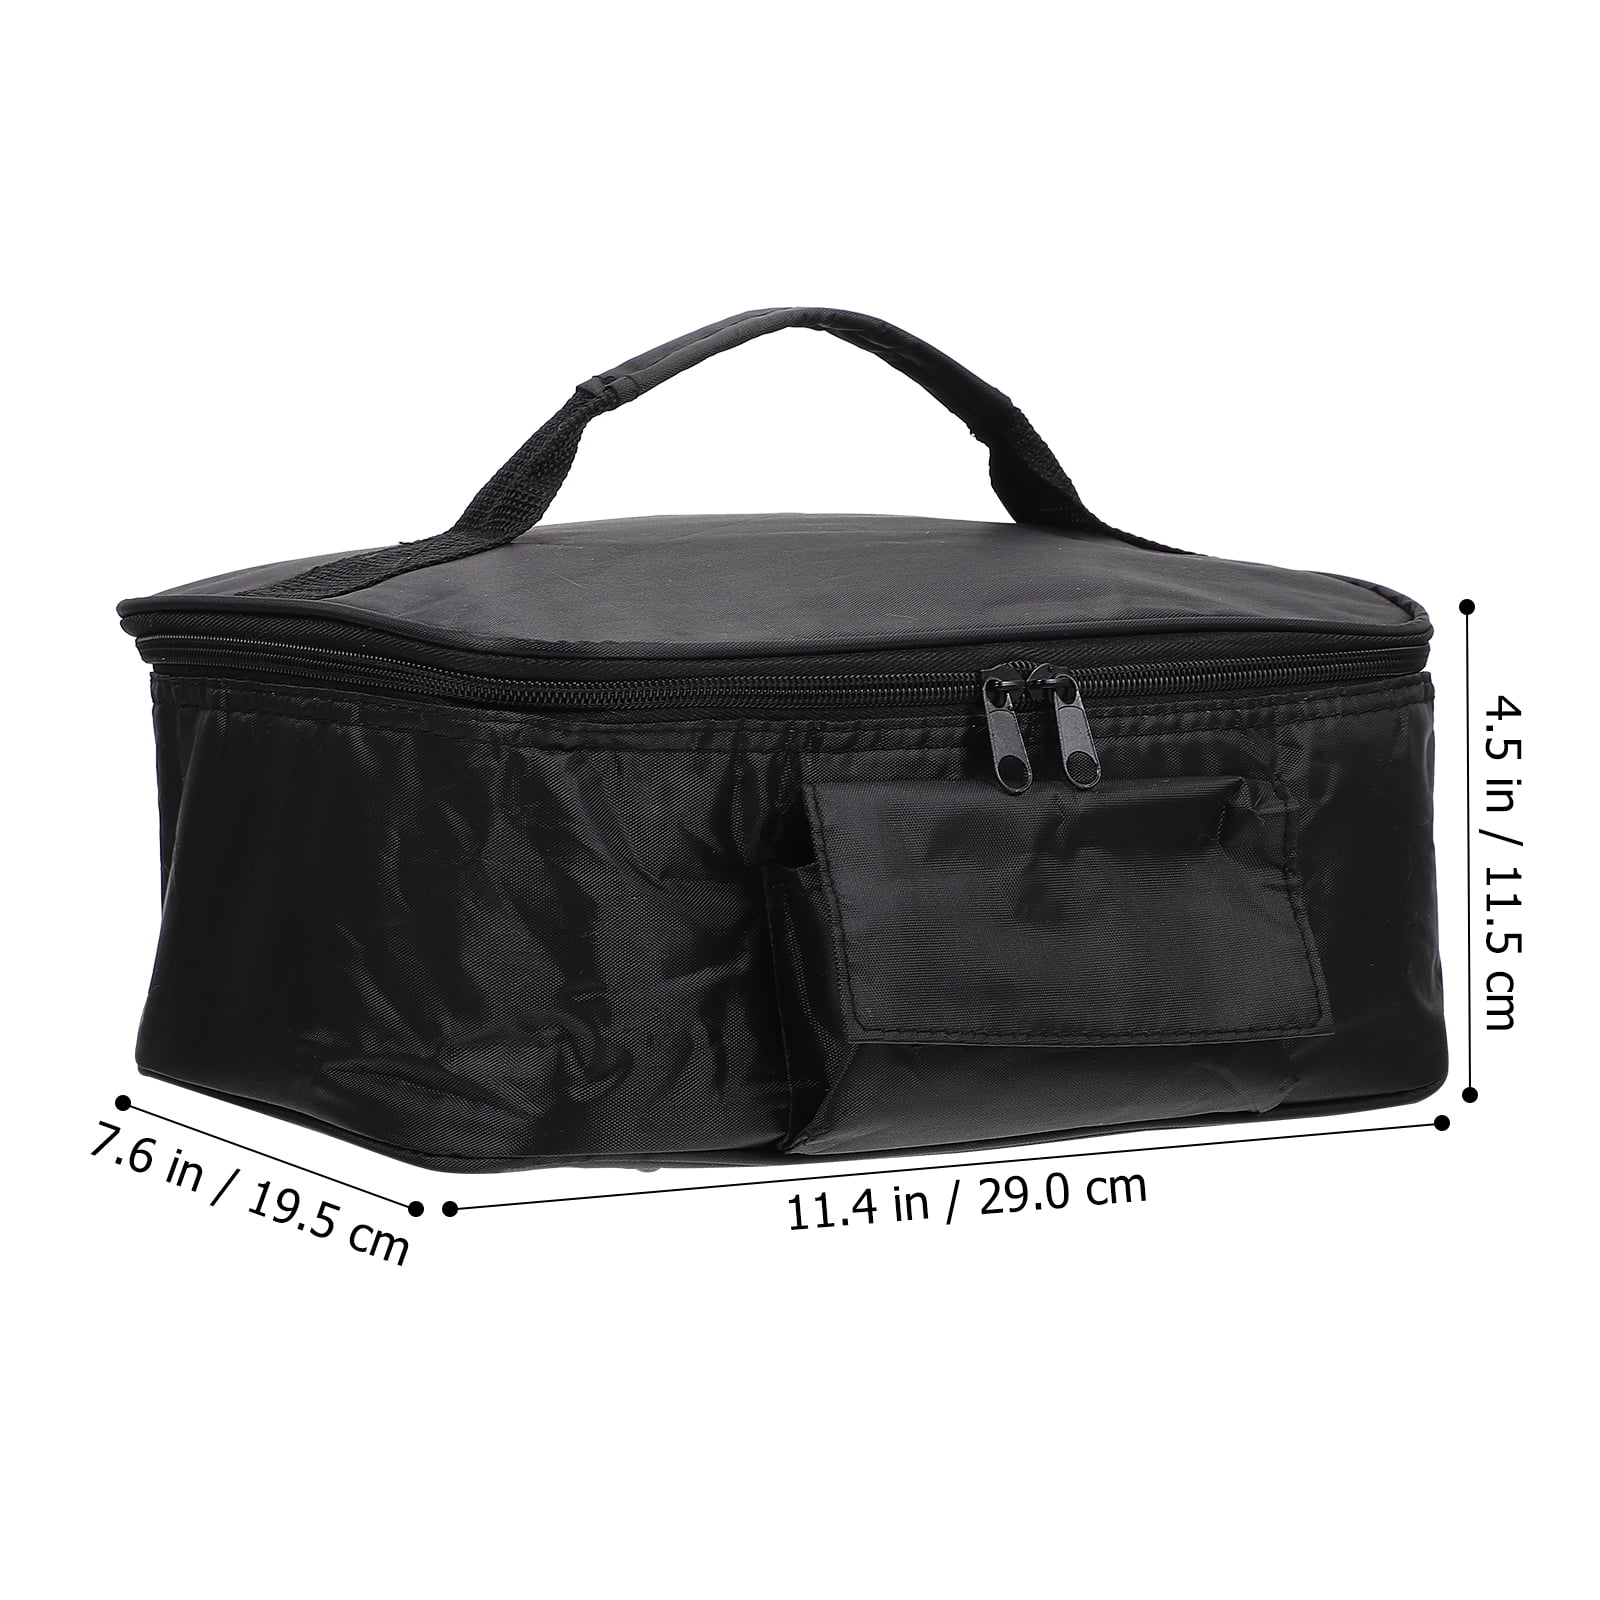 6 PACK Insulated BLACK Catering Delivery Chafing Dish Food Full Pan Carrier Bag 